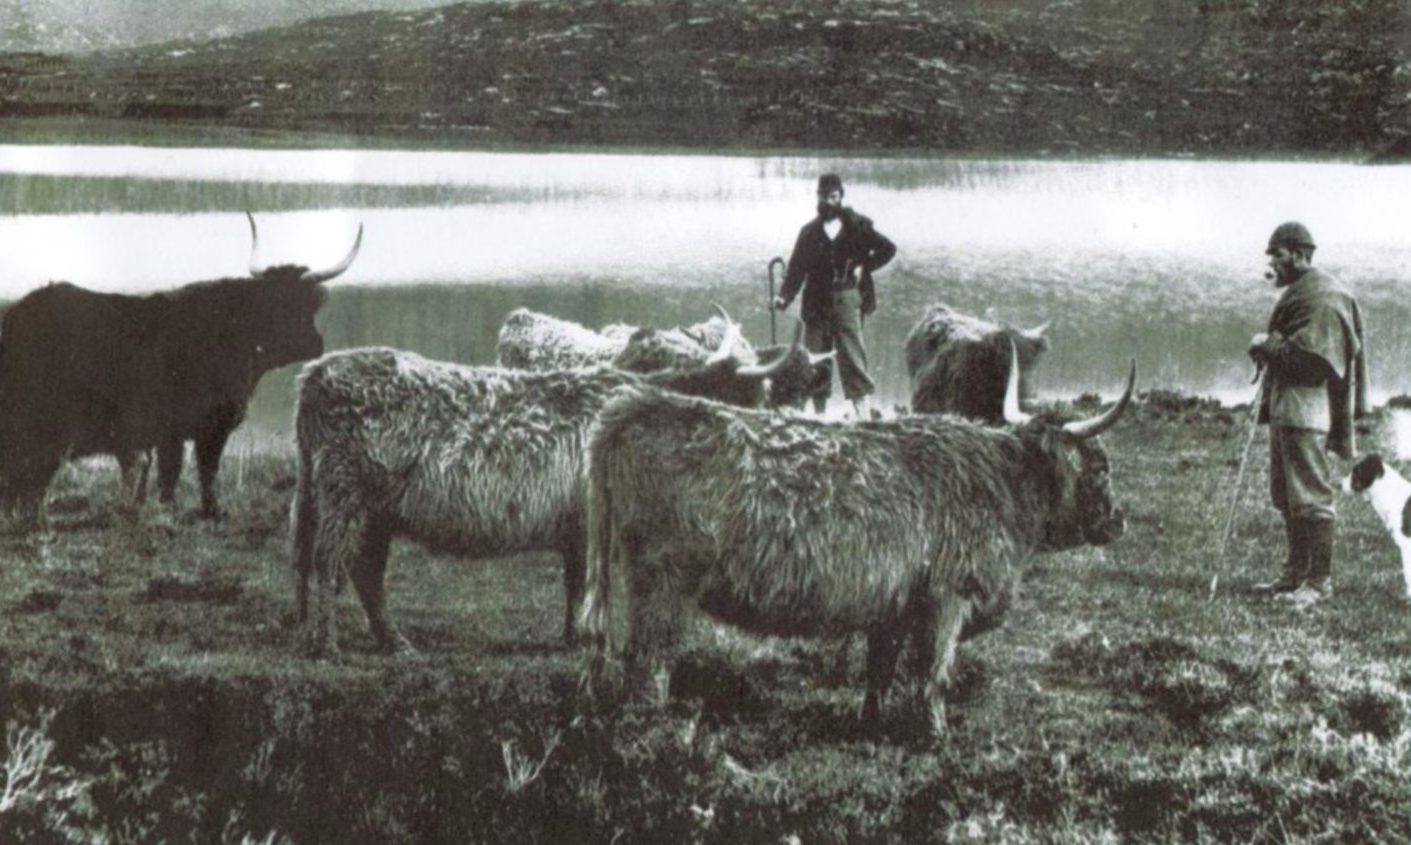 Highland drovers in the early 20th century.